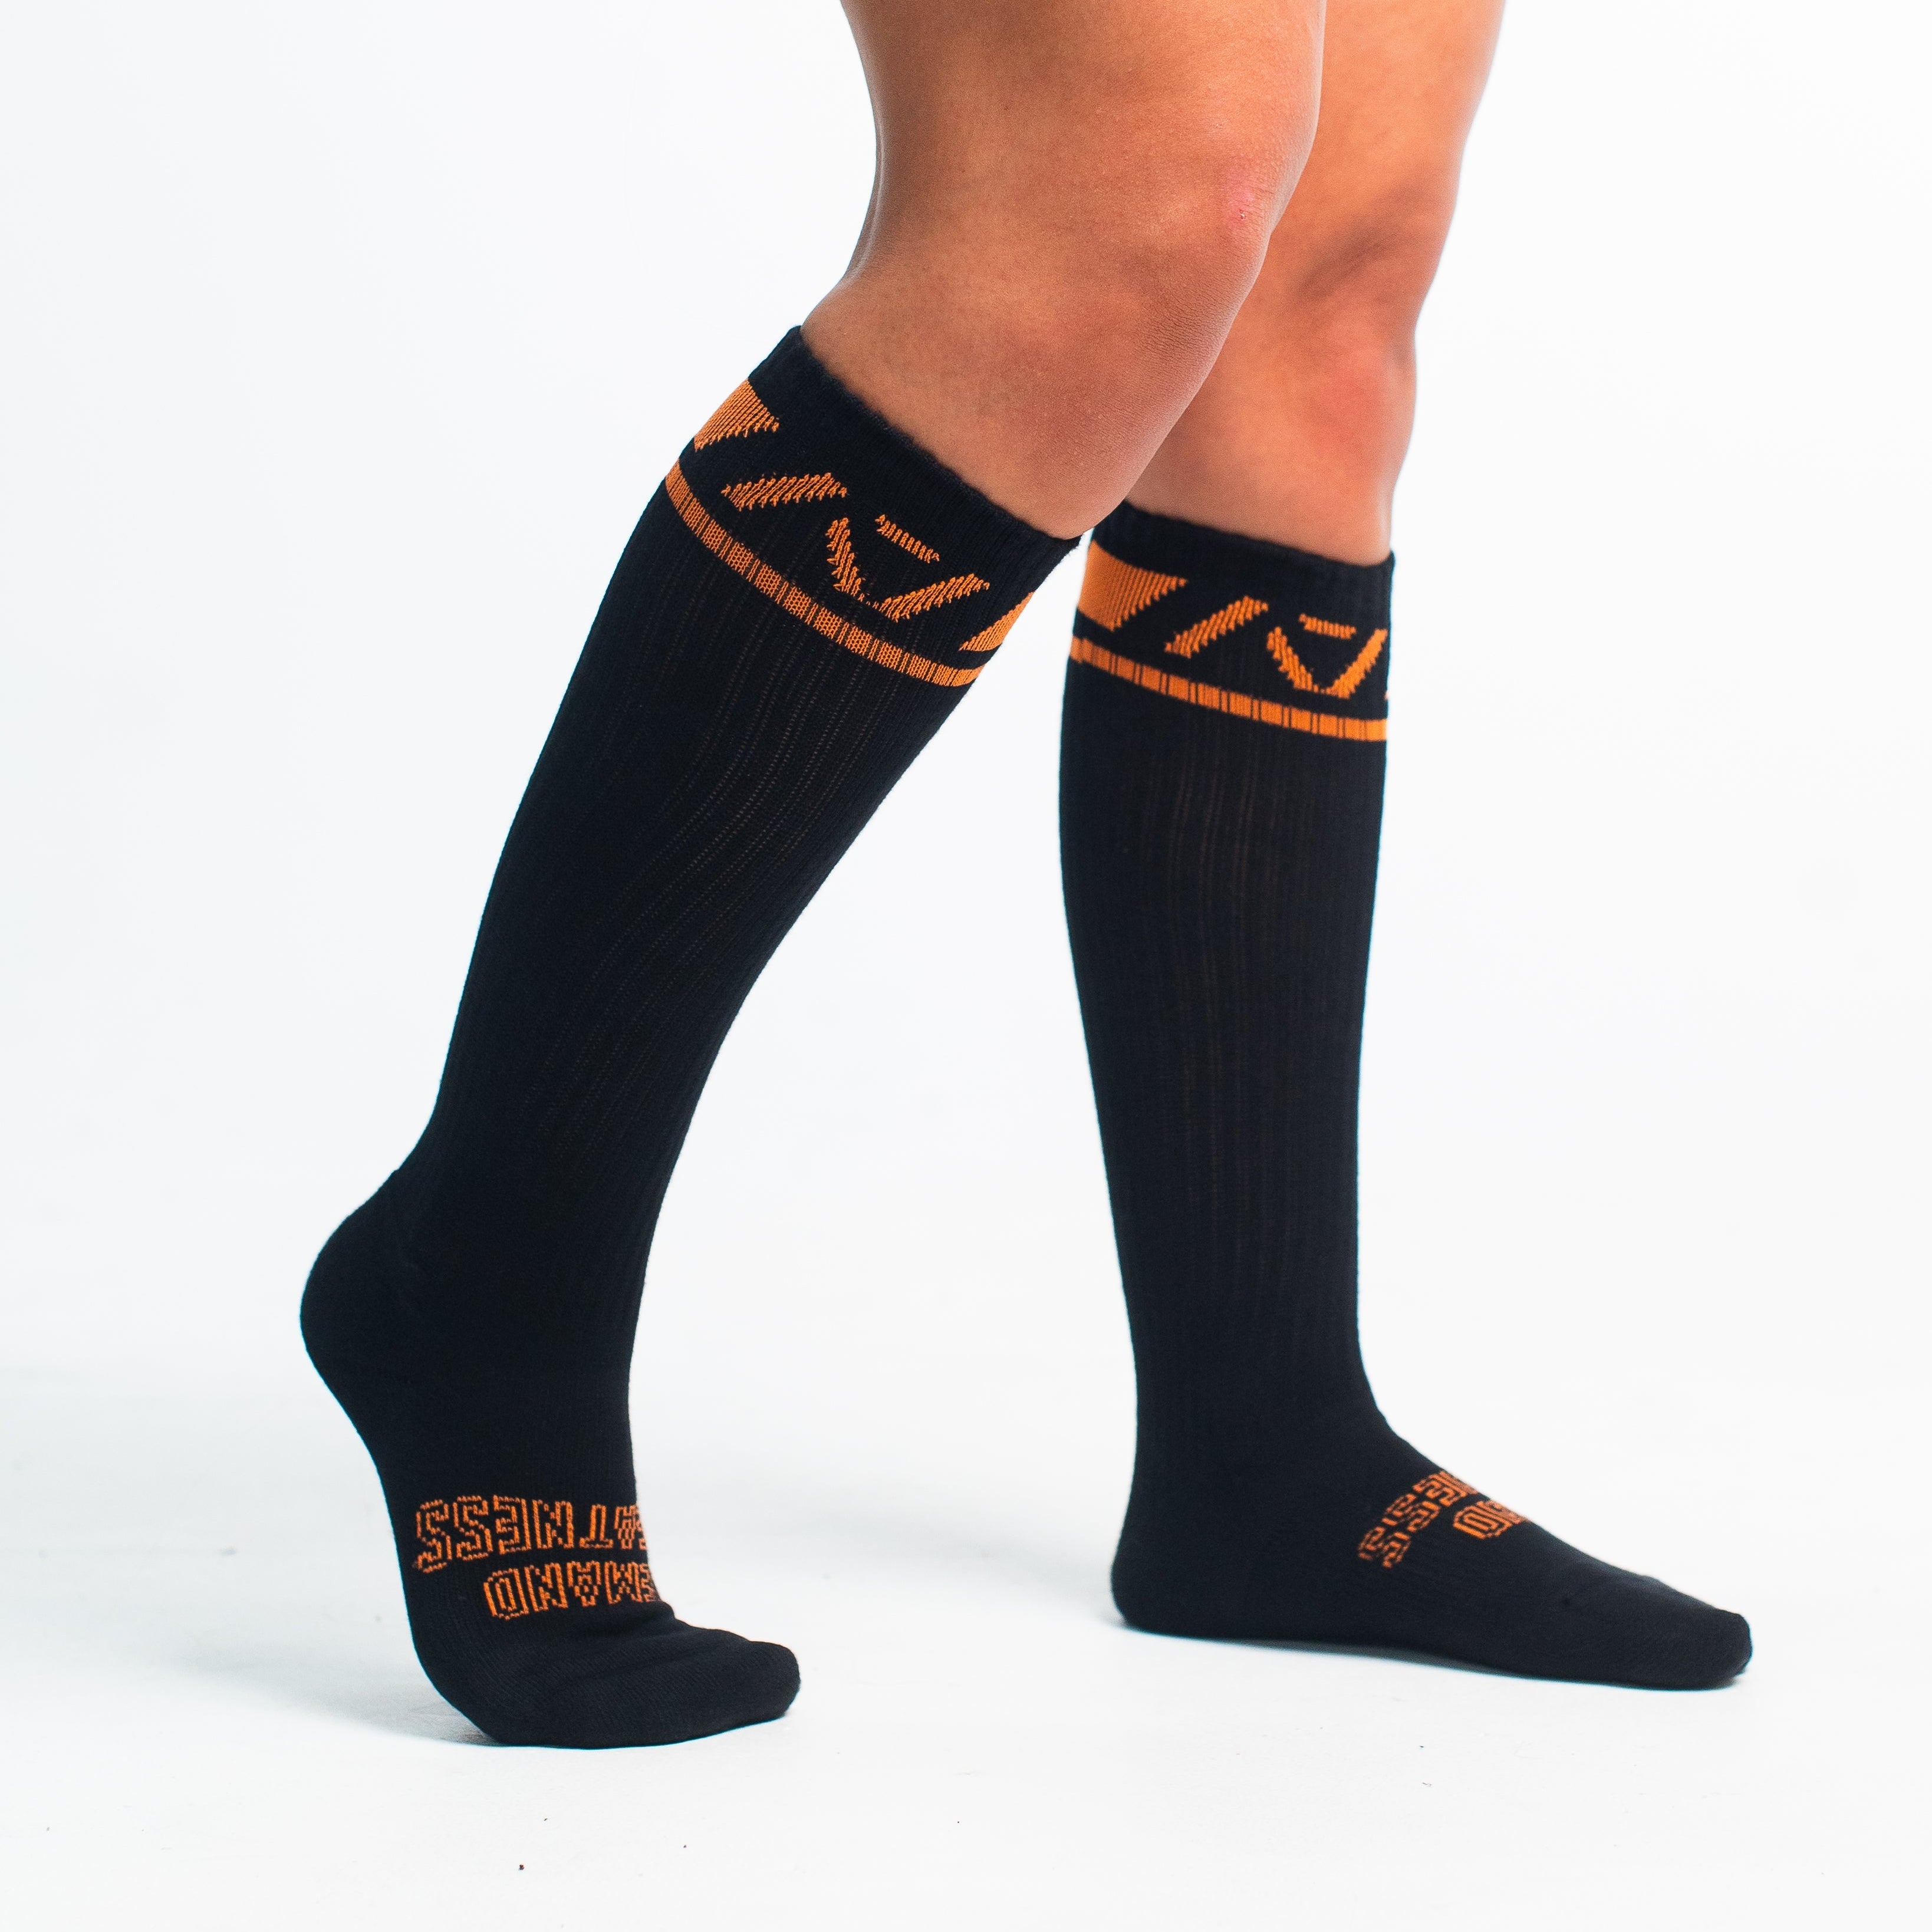 A7 Blaze deadlift socks are designed specifically for pulls and keep your shins protected from scrapes. A7 deadlift socks are a perfect pair to wear in training or powerlifting competition. The A7 IPF Approved Kit includes Powerlifting Singlet, A7 Meet Shirt, A7 Zebra Wrist Wraps, A7 Deadlift Socks, Hourglass Knee Sleeves (Stiff Knee Sleeves and Rigor Mortis Knee Sleeves). Genouillères powerlifting shipping to France, Spain, Ireland, Germany, Italy, Sweden and EU. 